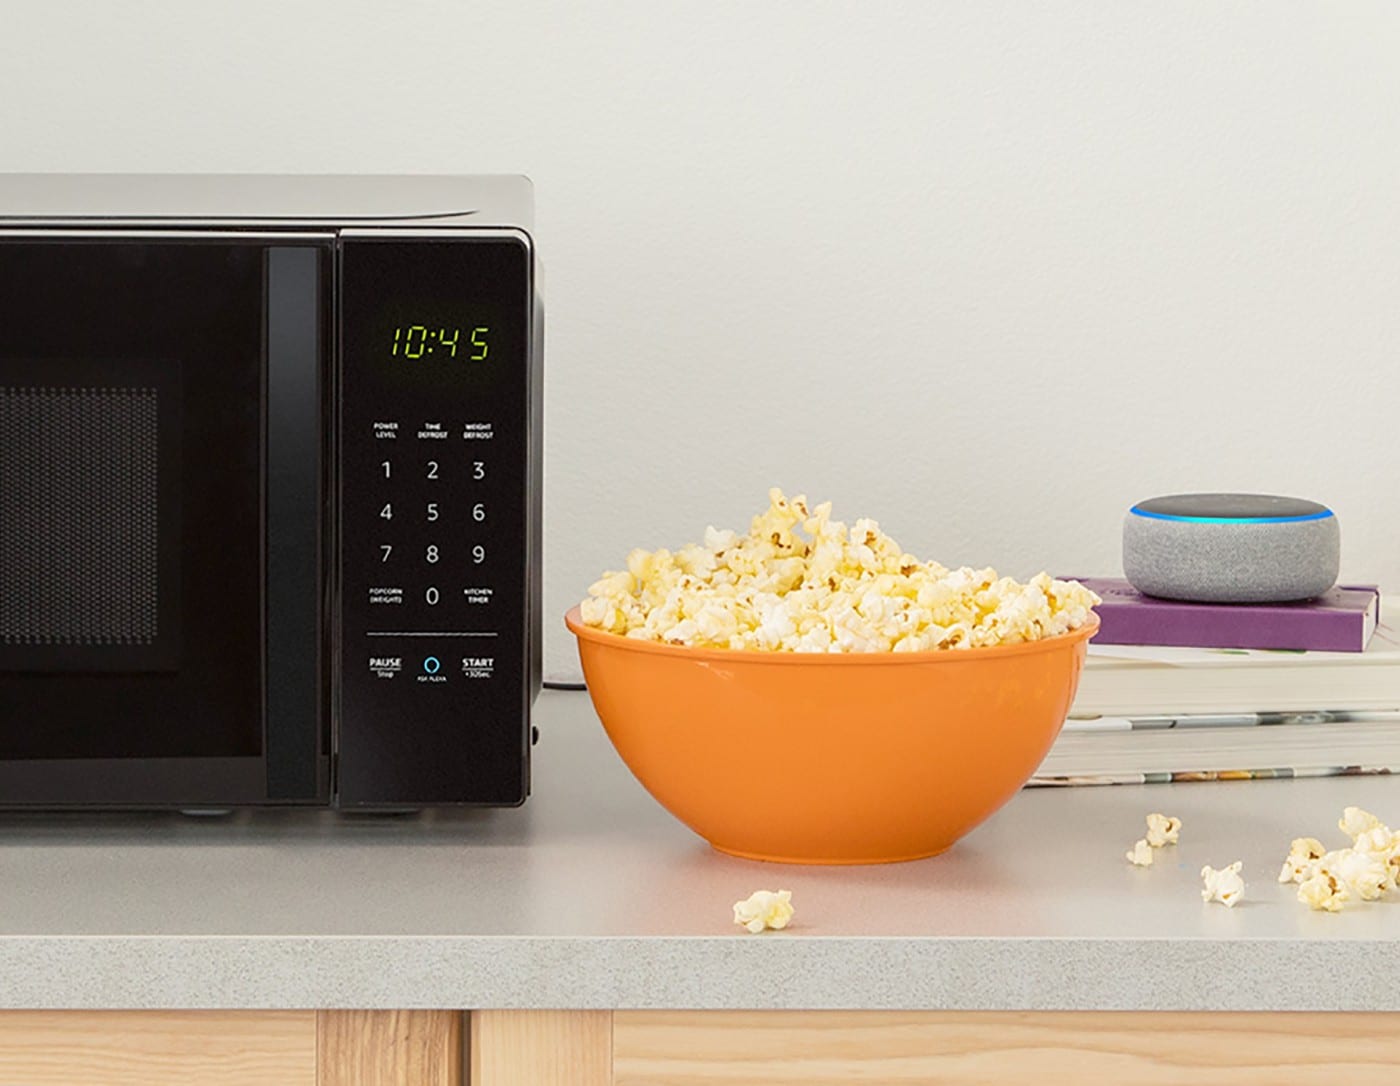 An image of a microwave and a bowl of popcorn.